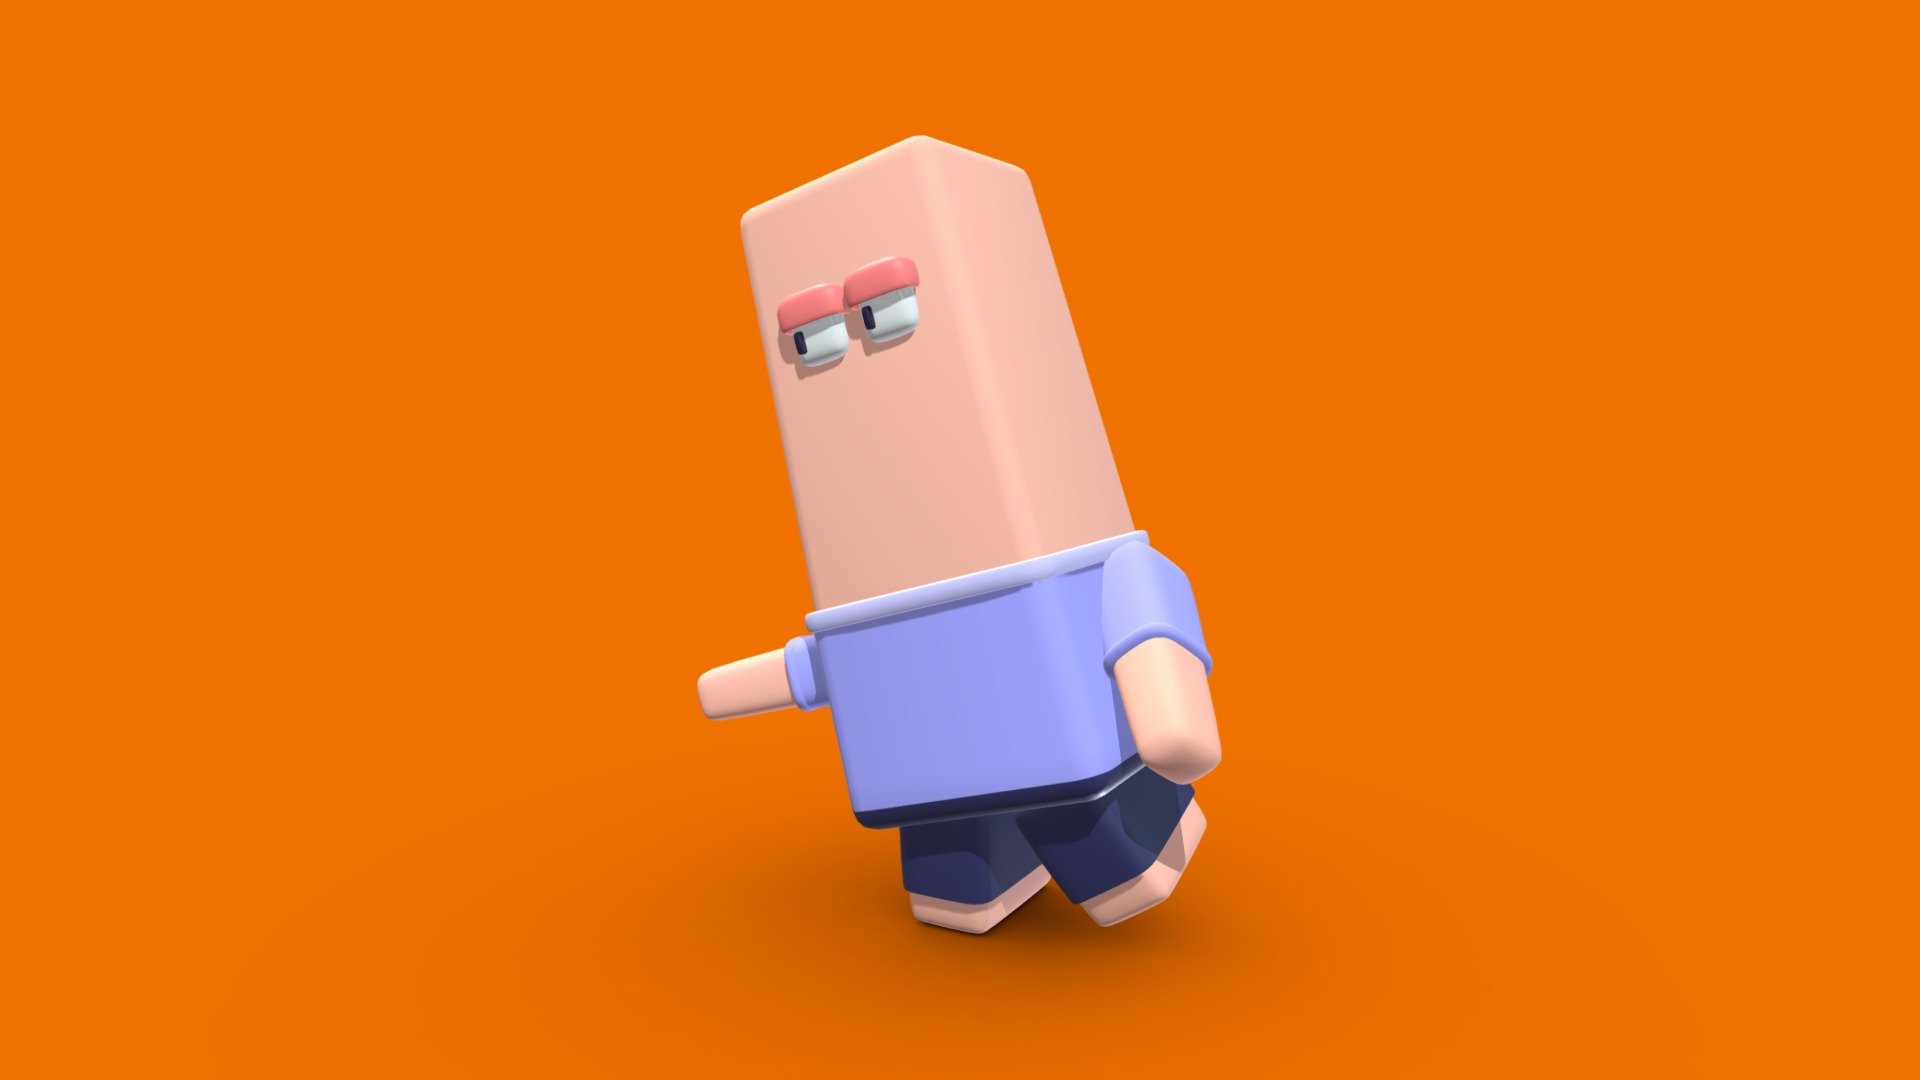 This is one among the very first character i made using blender, feel free to download and use it on your project if you want it :) - Cute cube like cartoon character - Download Free 3D model by Ndevisuals (@Wade23) 3d model